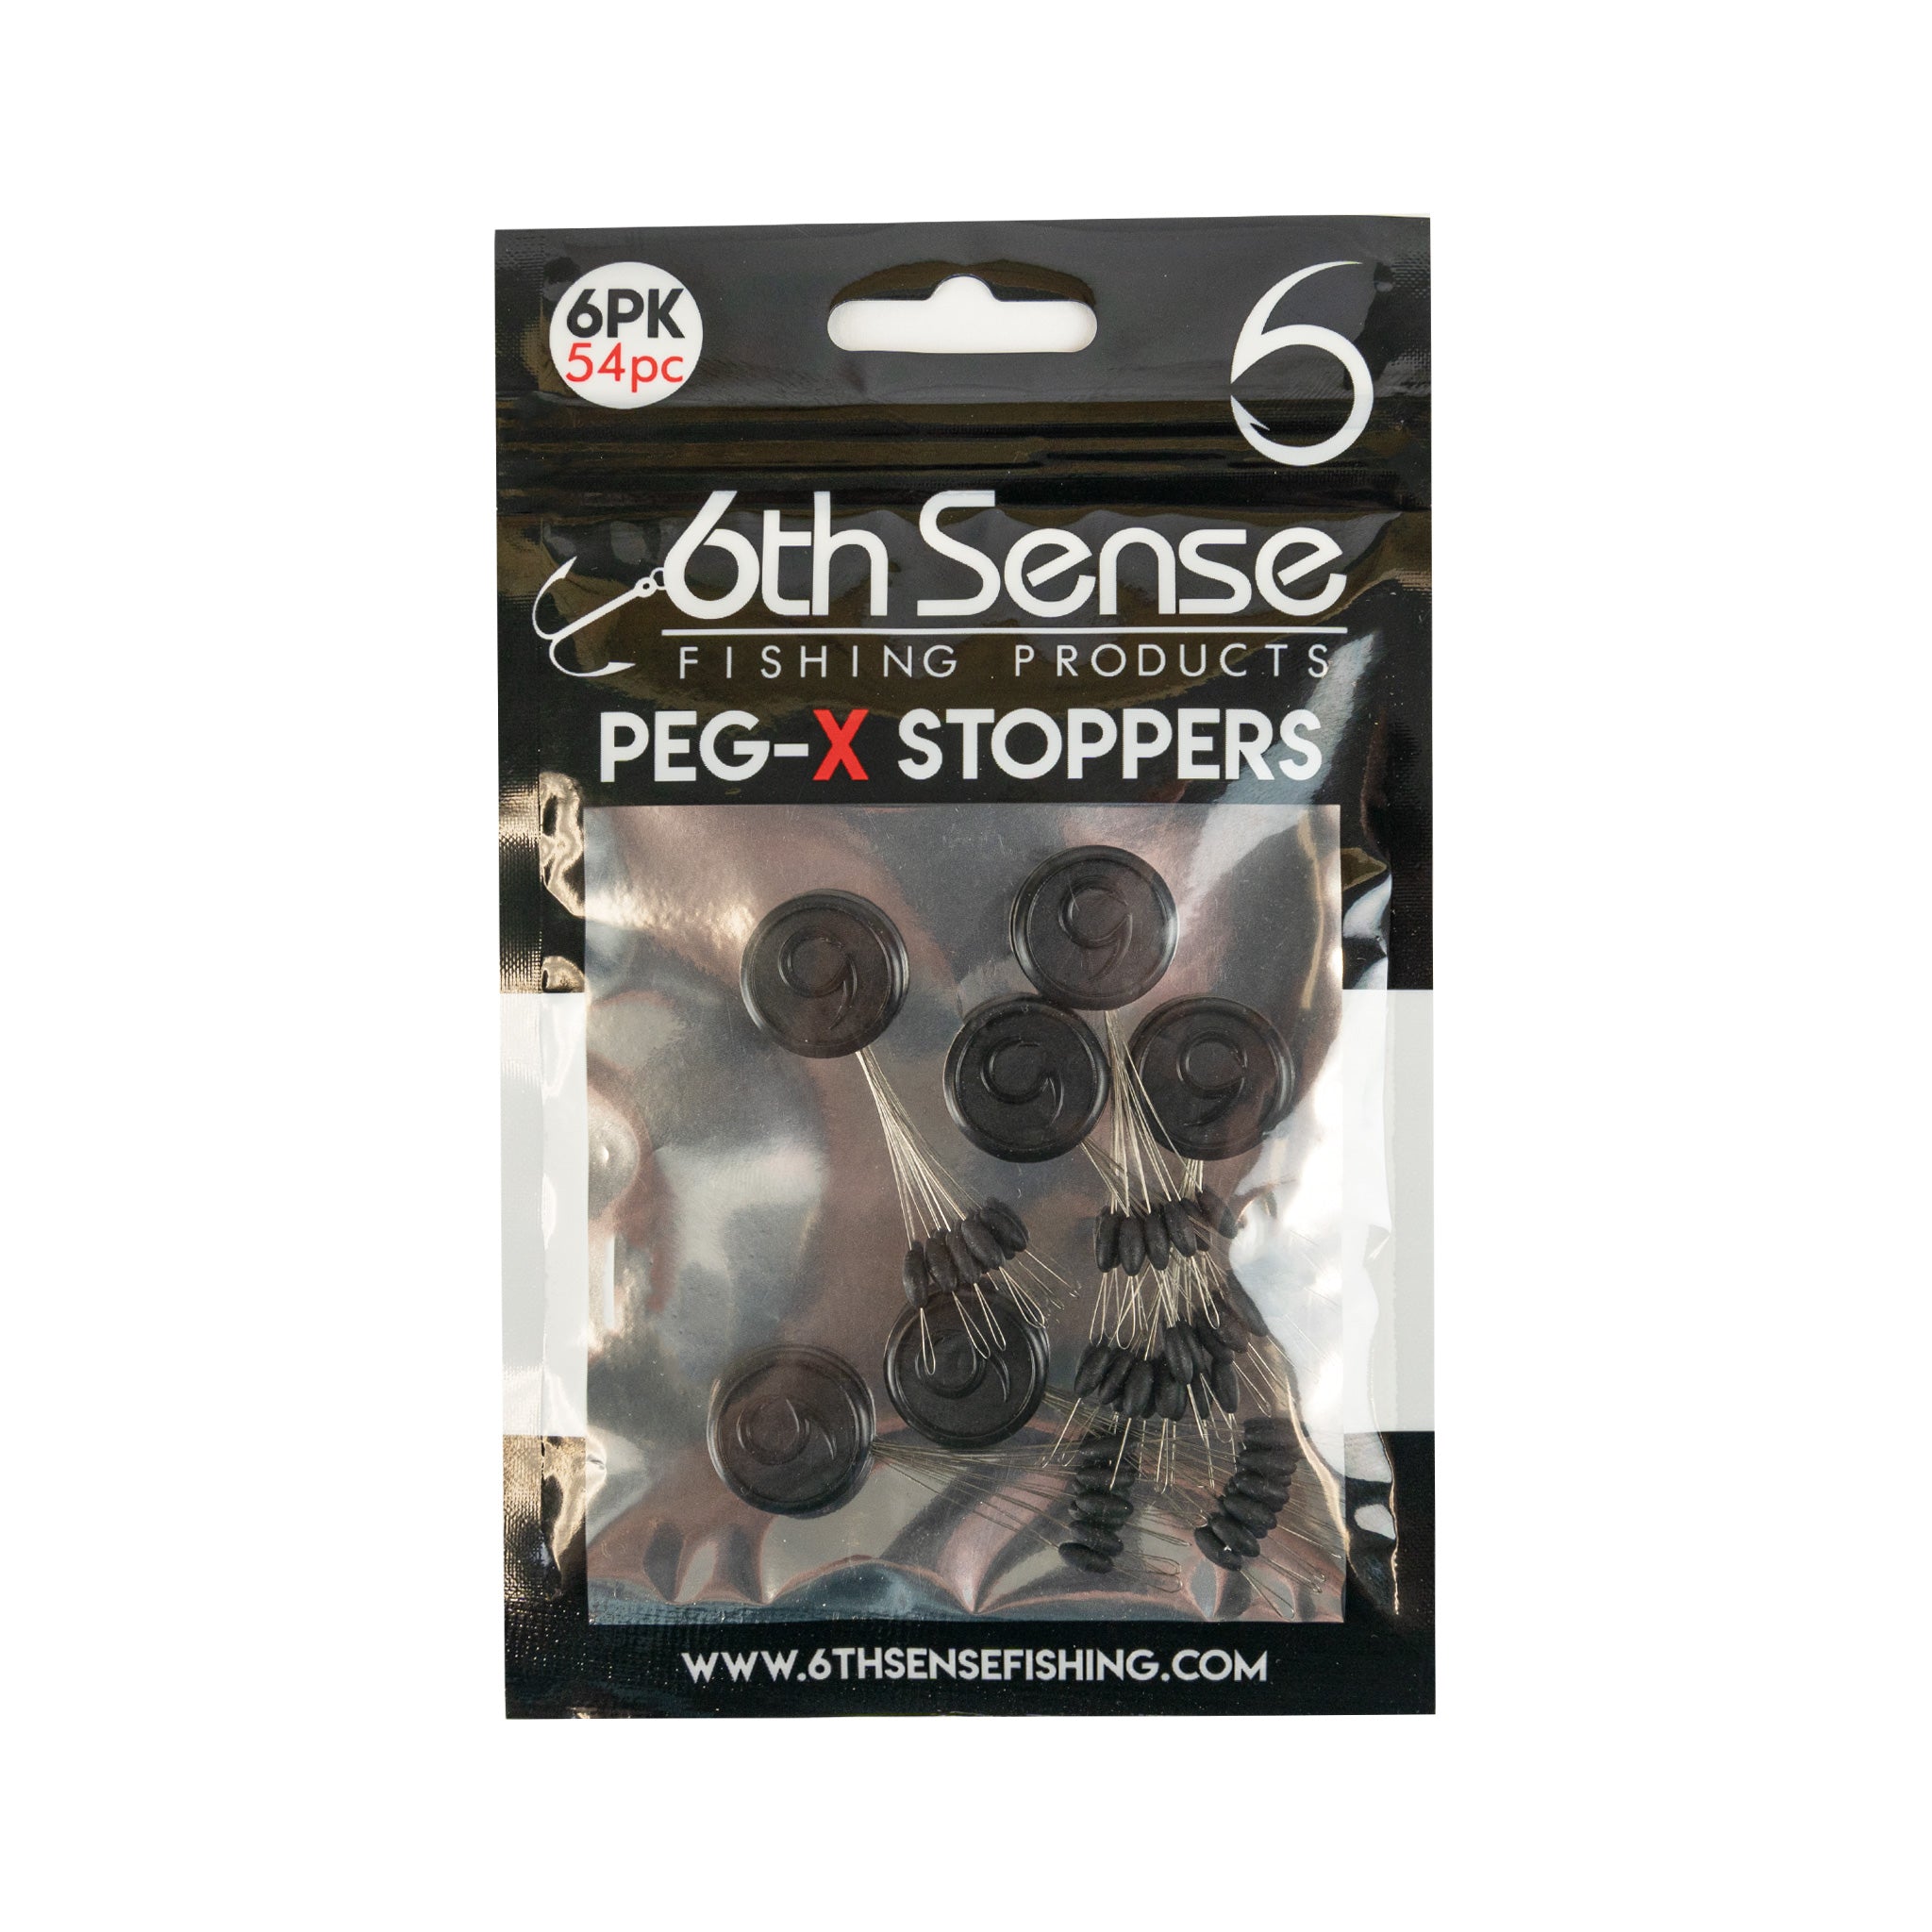 6th Sense - Peg-X Weight Stoppers